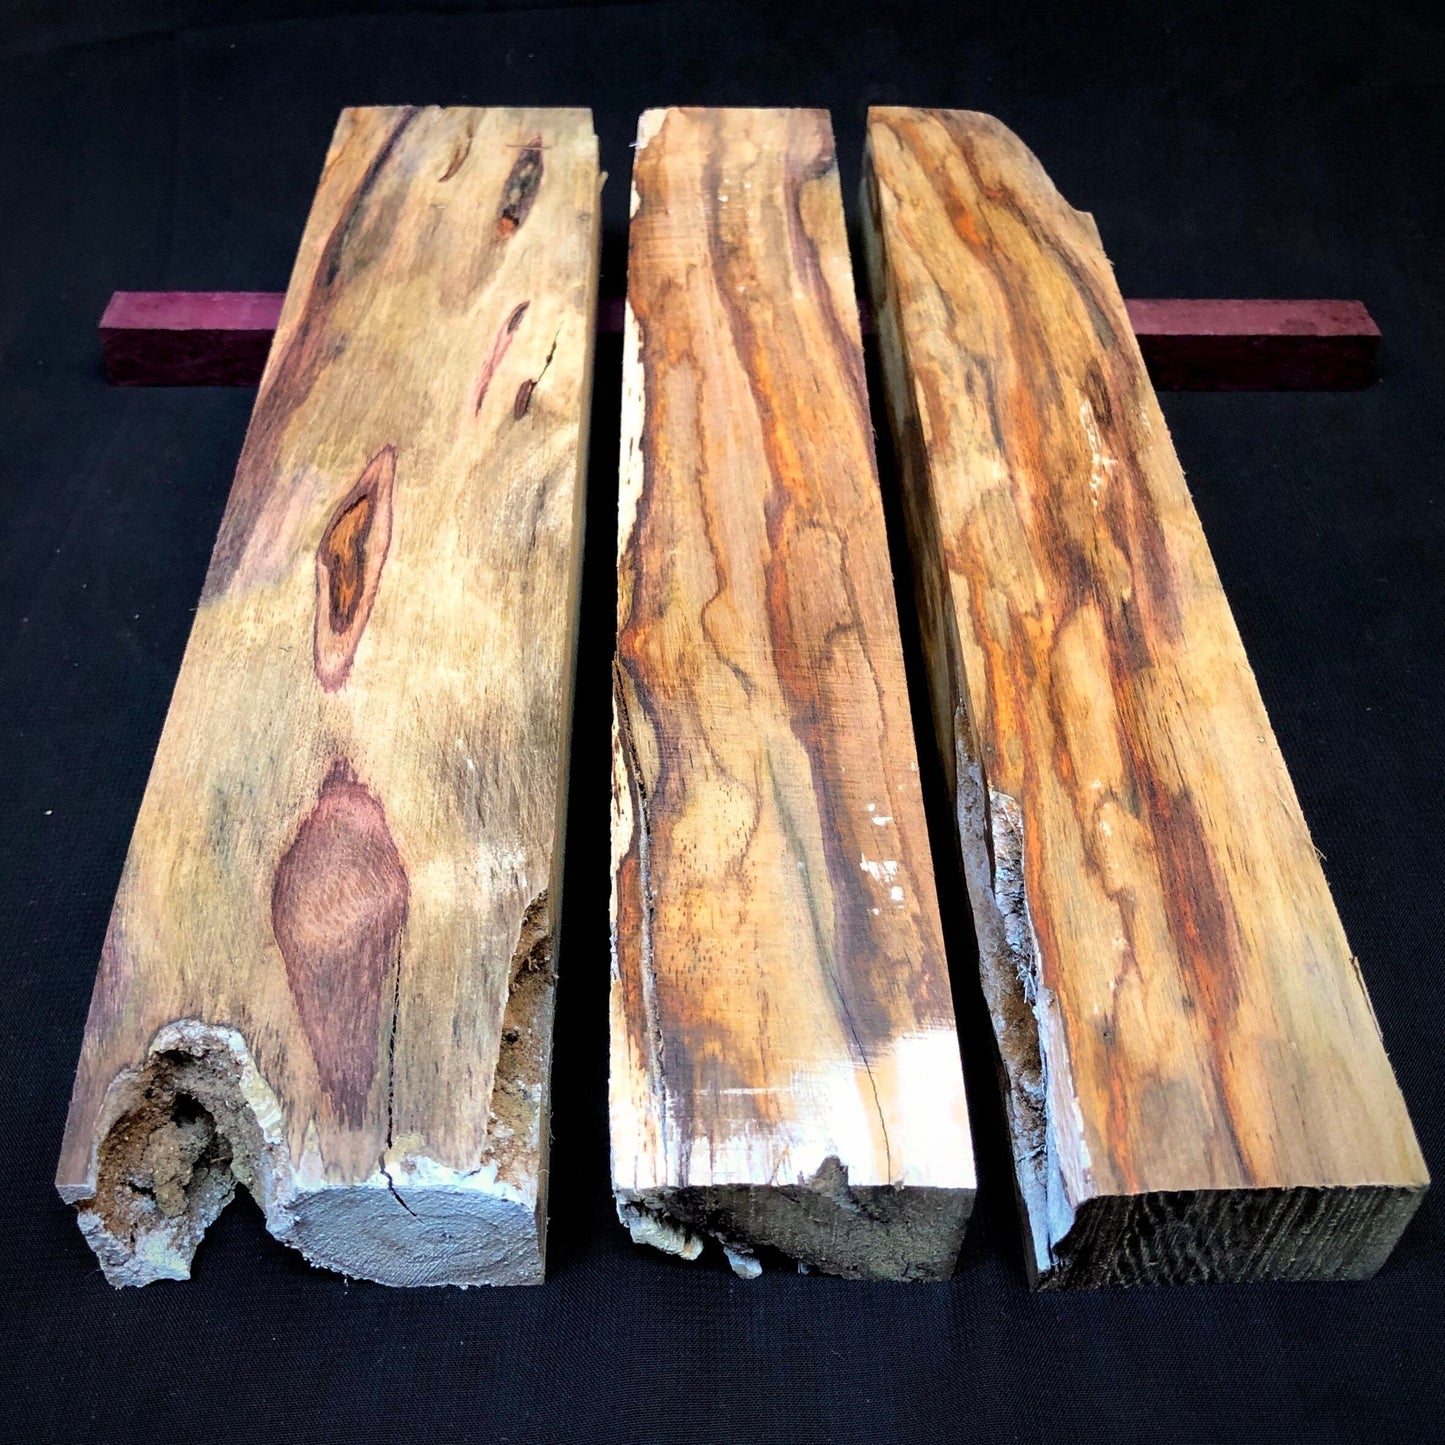 ROSEWOOD SPALTED, Rare Blanks for Crafting, Woodworking, Precious Woods. France Stock